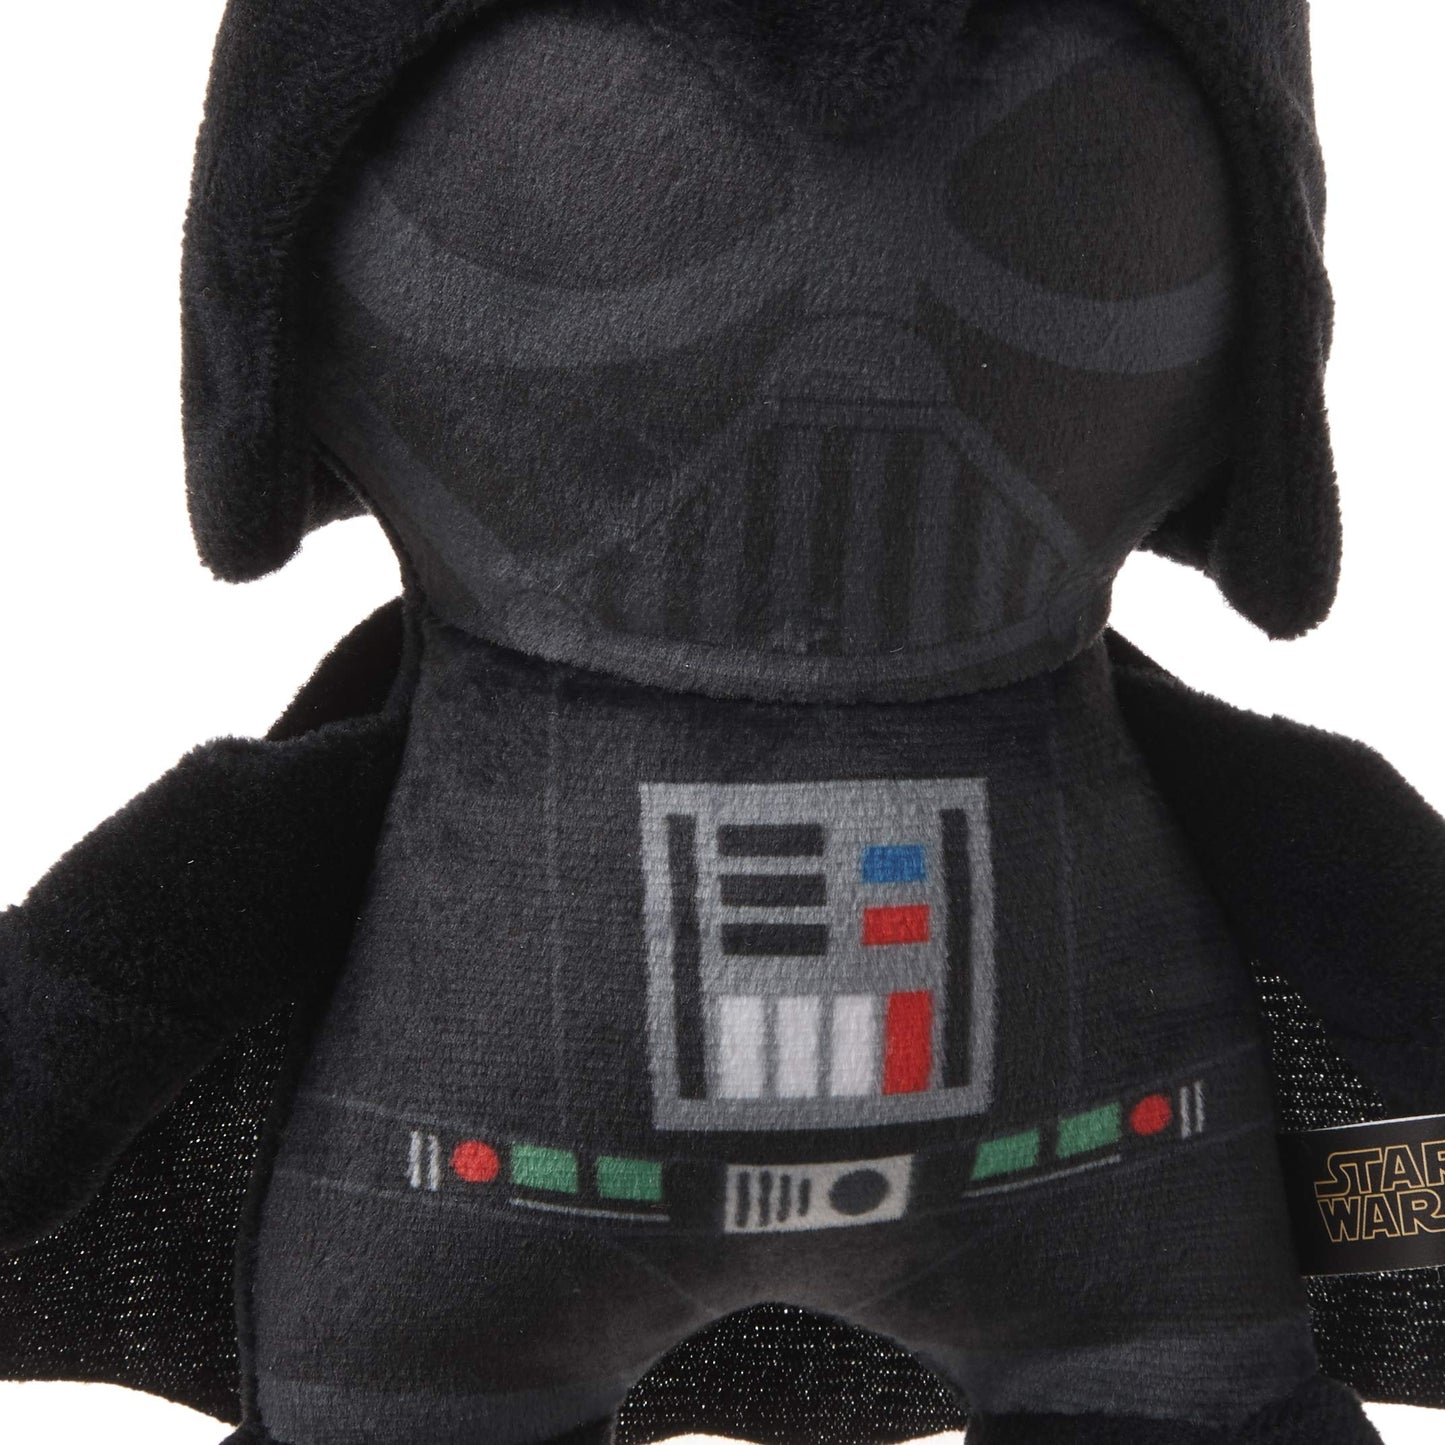 Star Wars for Pets Plush Darth Vader Figure Dog Toy | Soft Star Wars Squeaky Dog Toy | Large | Adorable Toys for All Dogs, Official Dog Toy Product of Star Wars for Pets